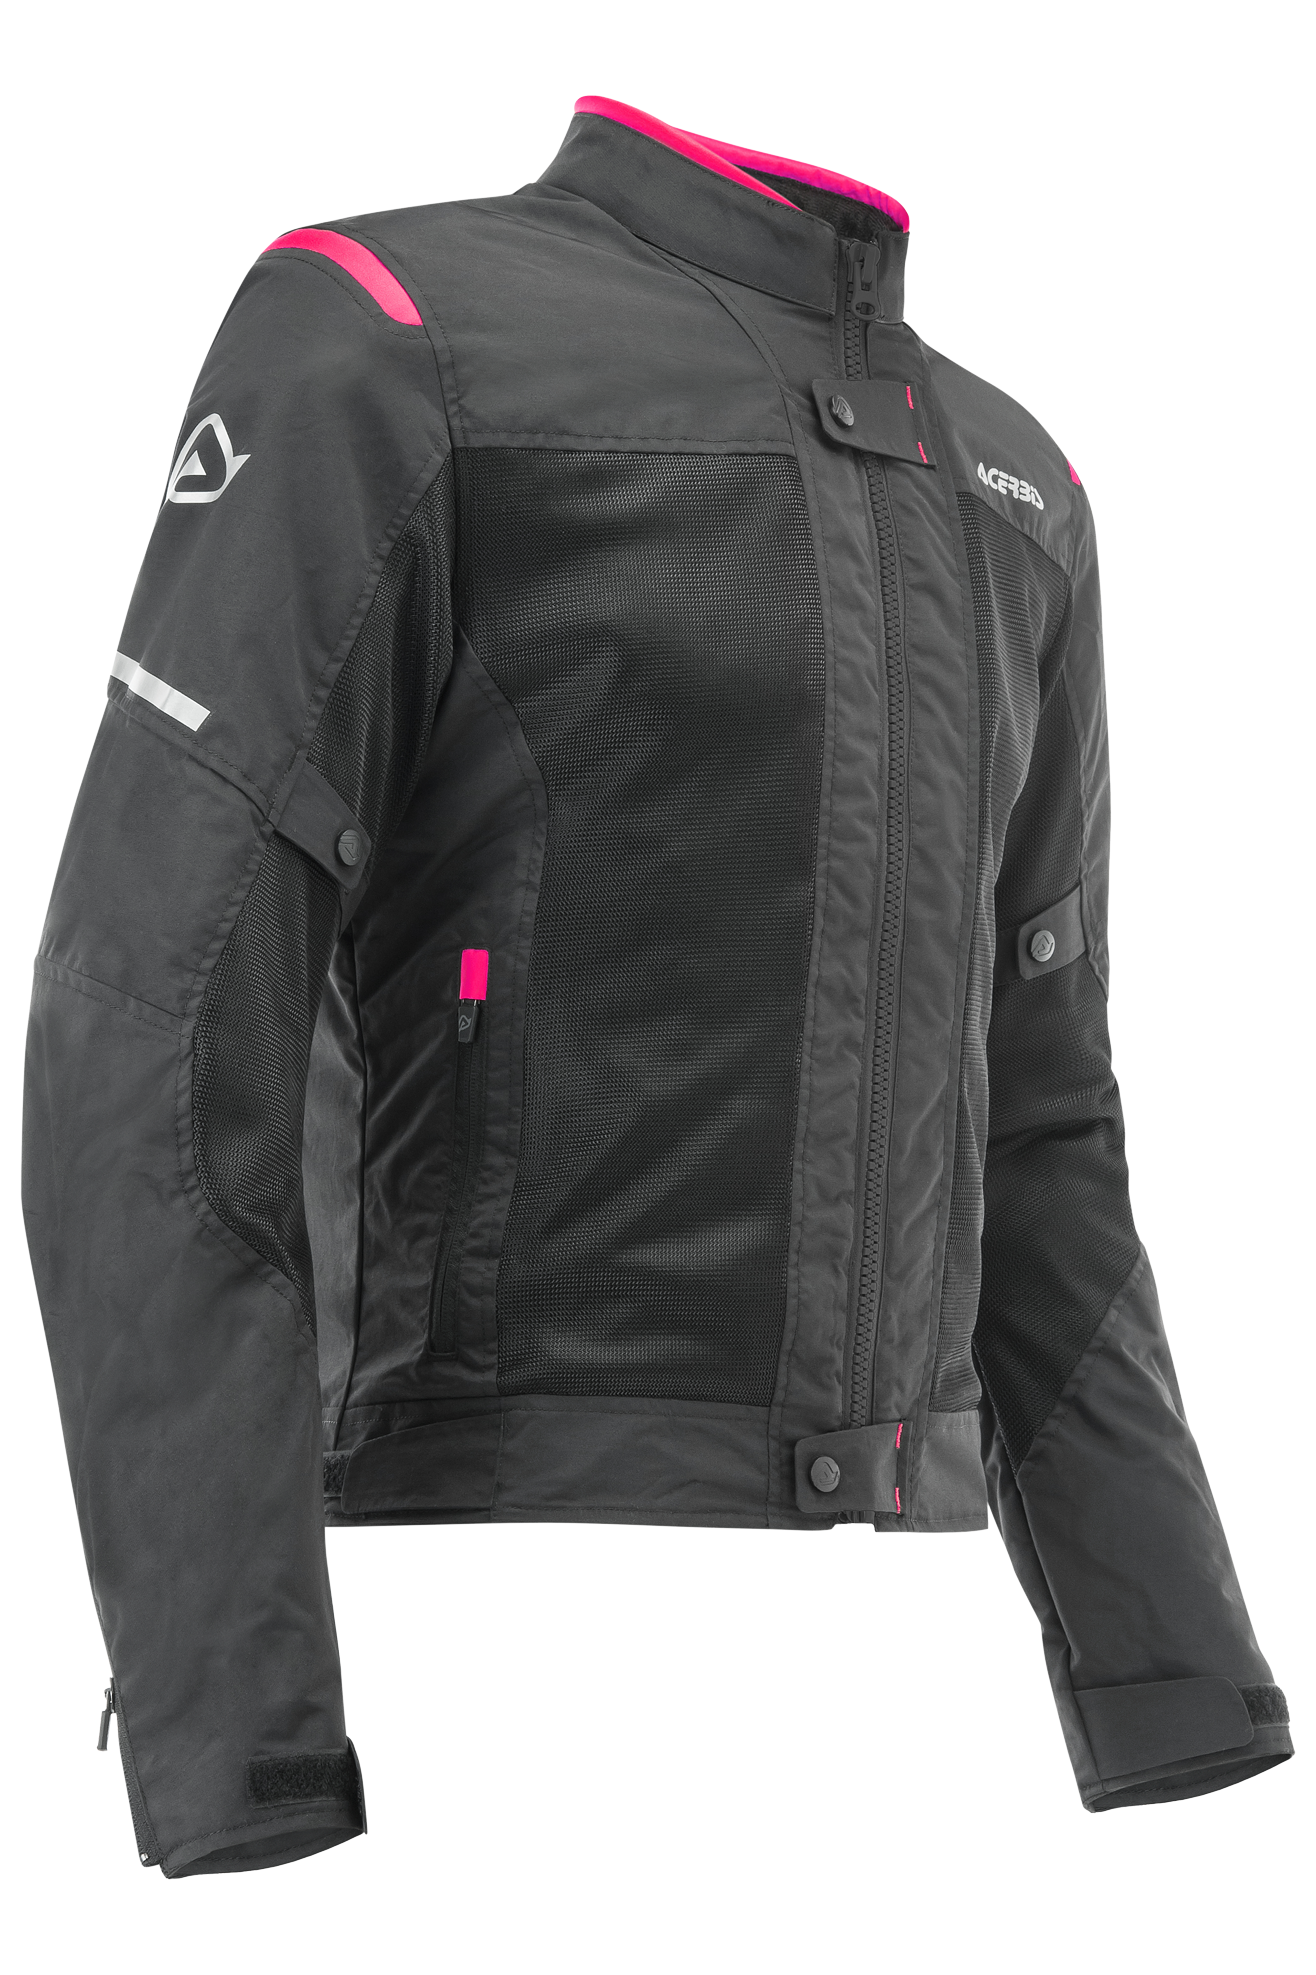 Acerbis Giacca Moto Donna  Ramsey My Vented 2.0 Nero-Rosa